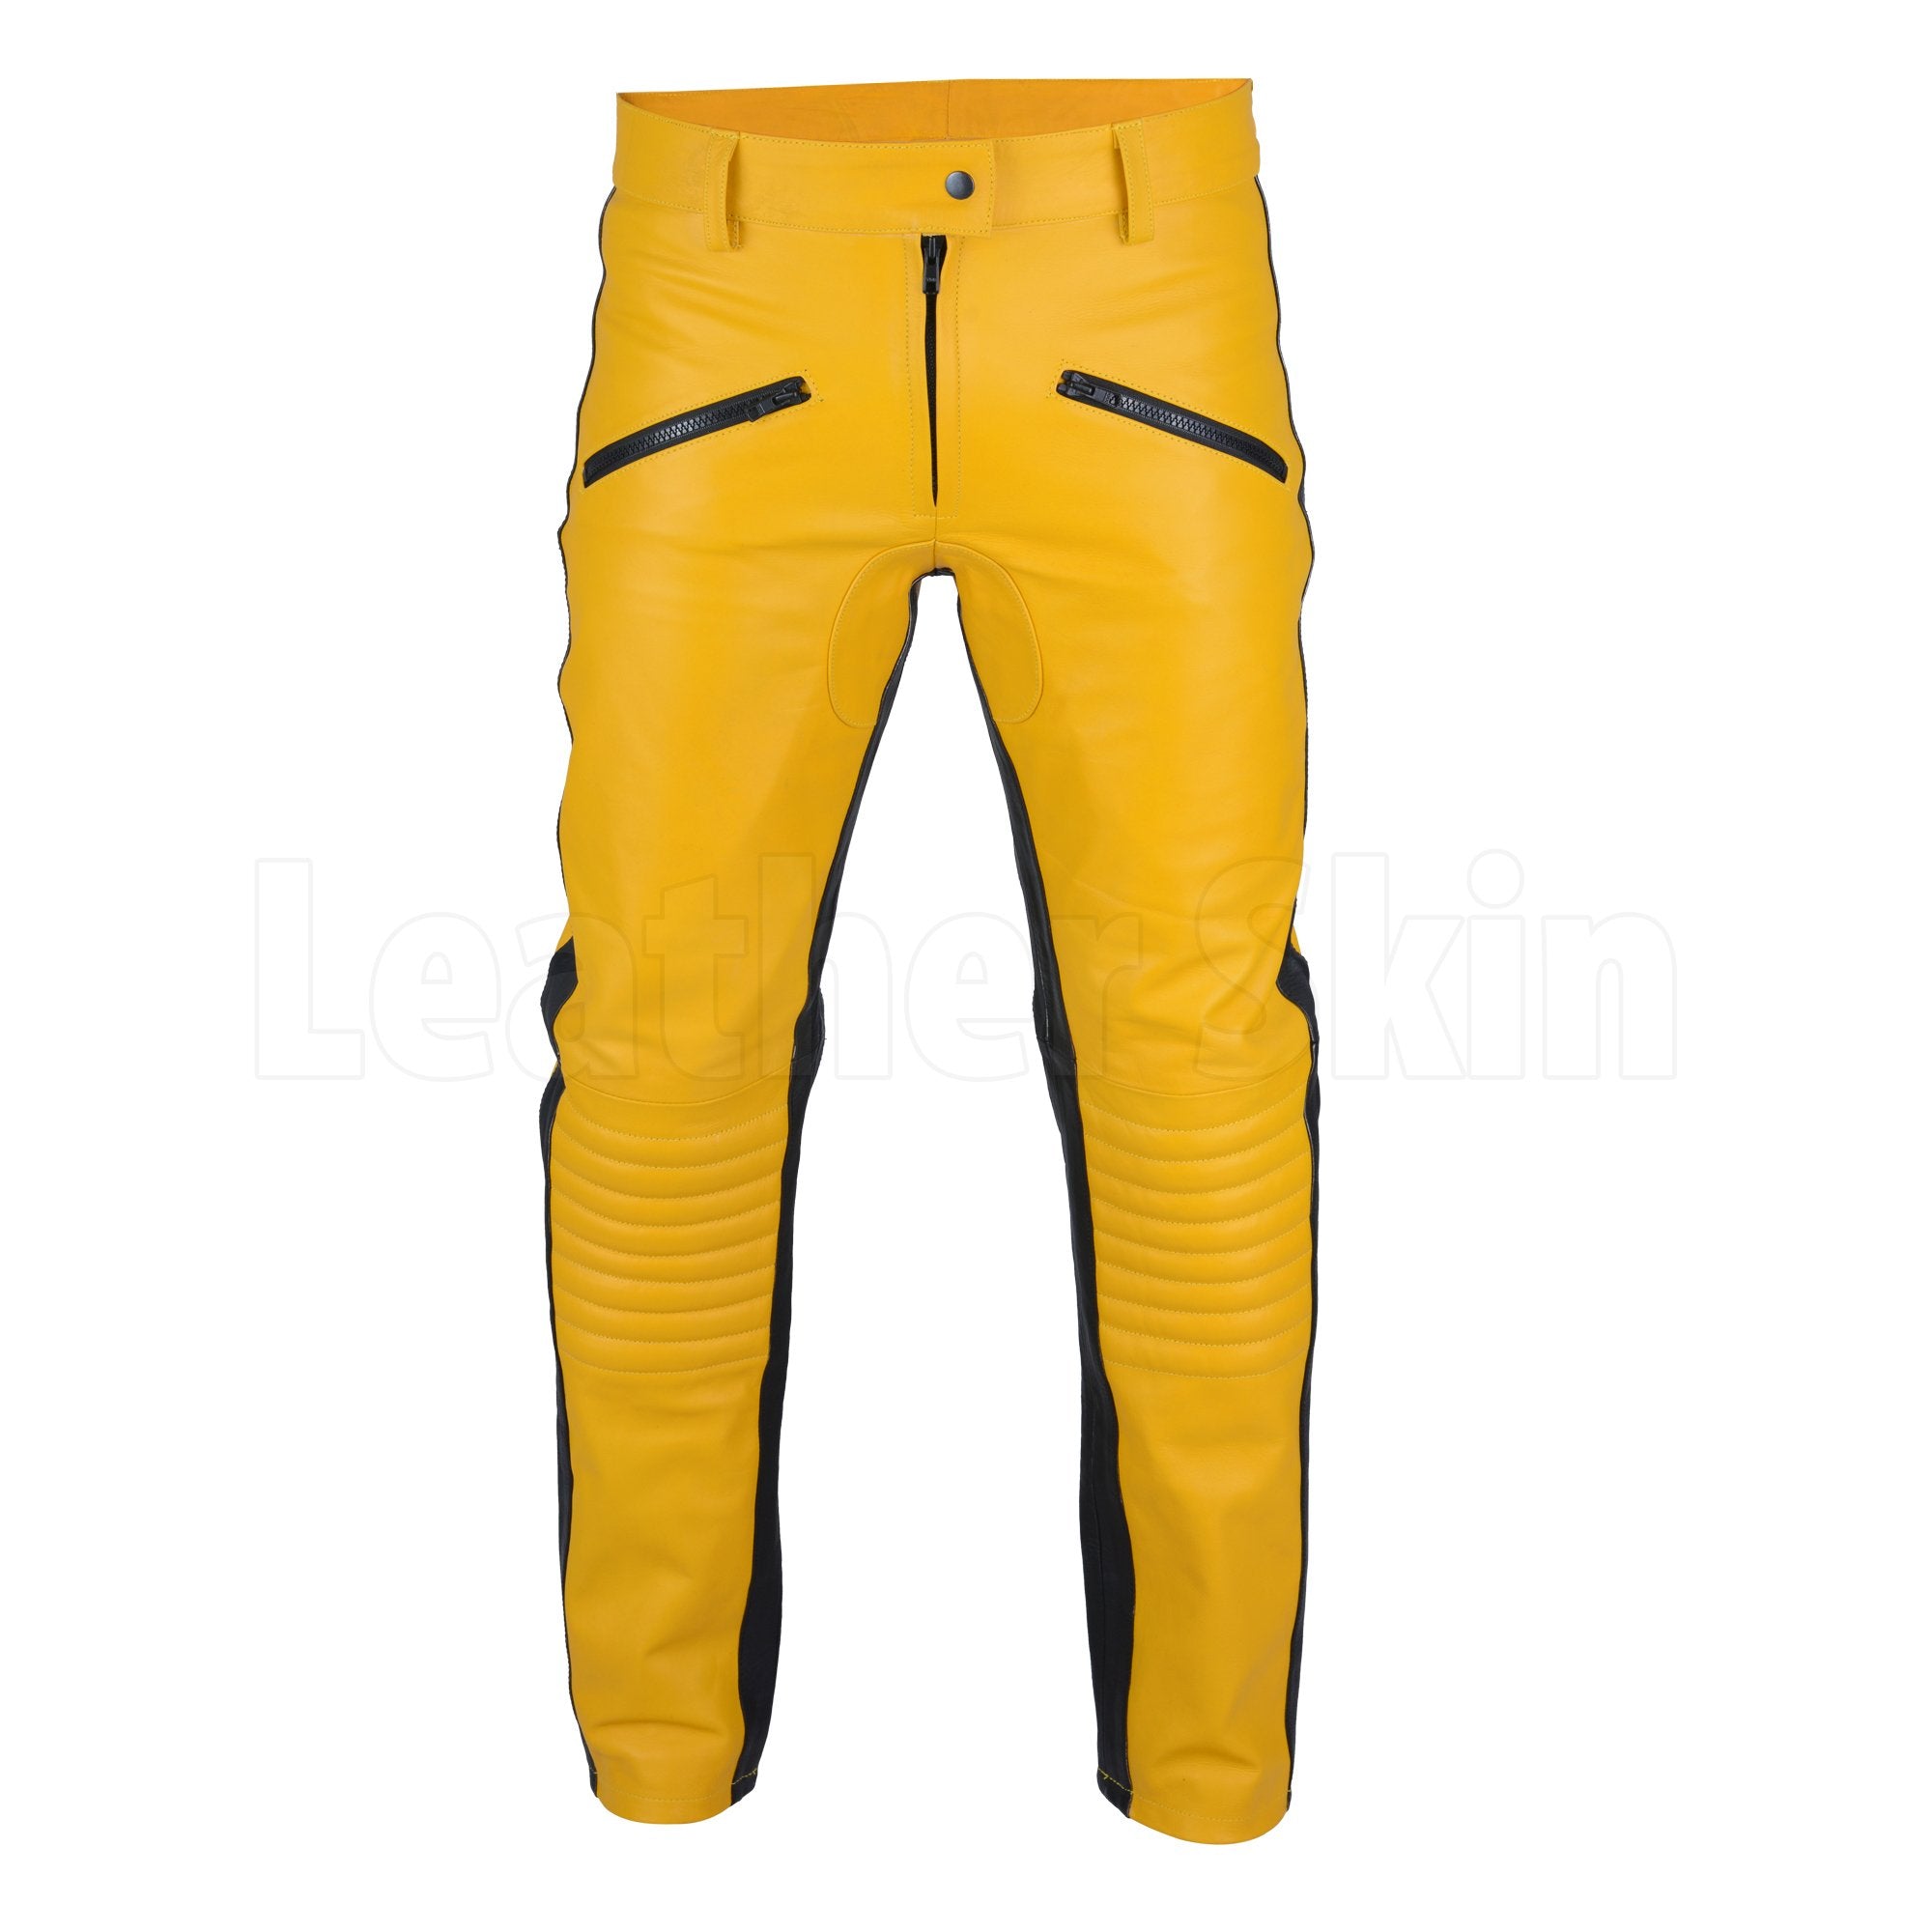 Yellow Leather Pants for Women – Women's Leather Pants - Leather Skin Shop